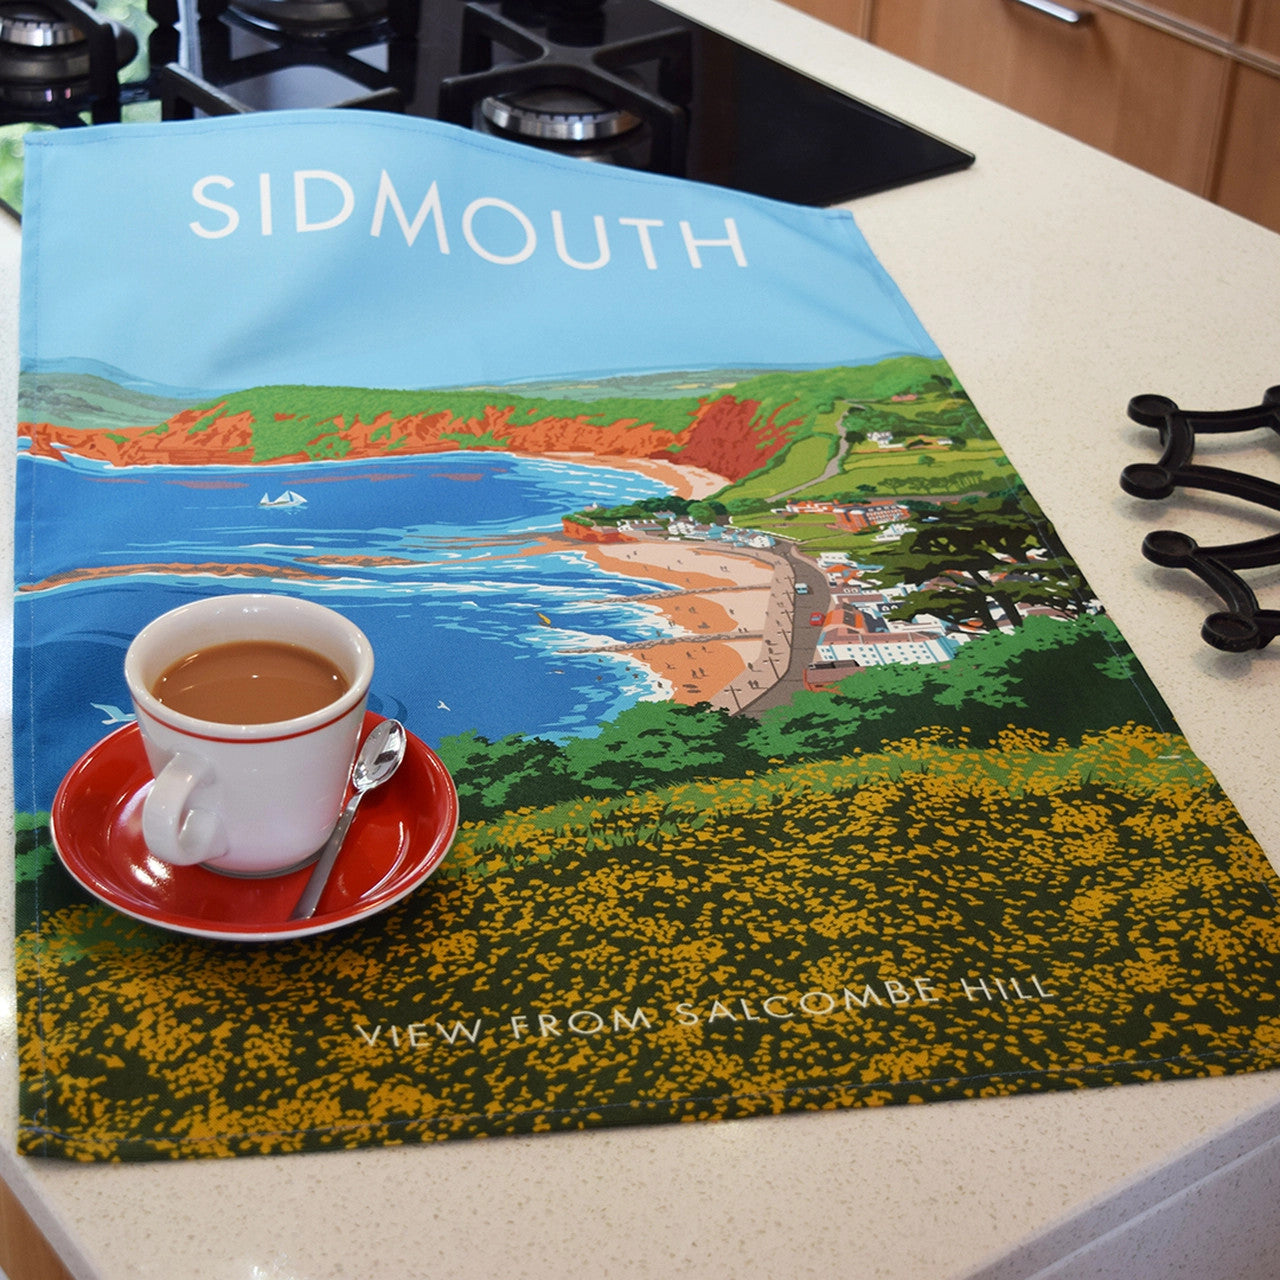 Sidmouth - View from Salcombe Hill Tea Towel by Town Towels.